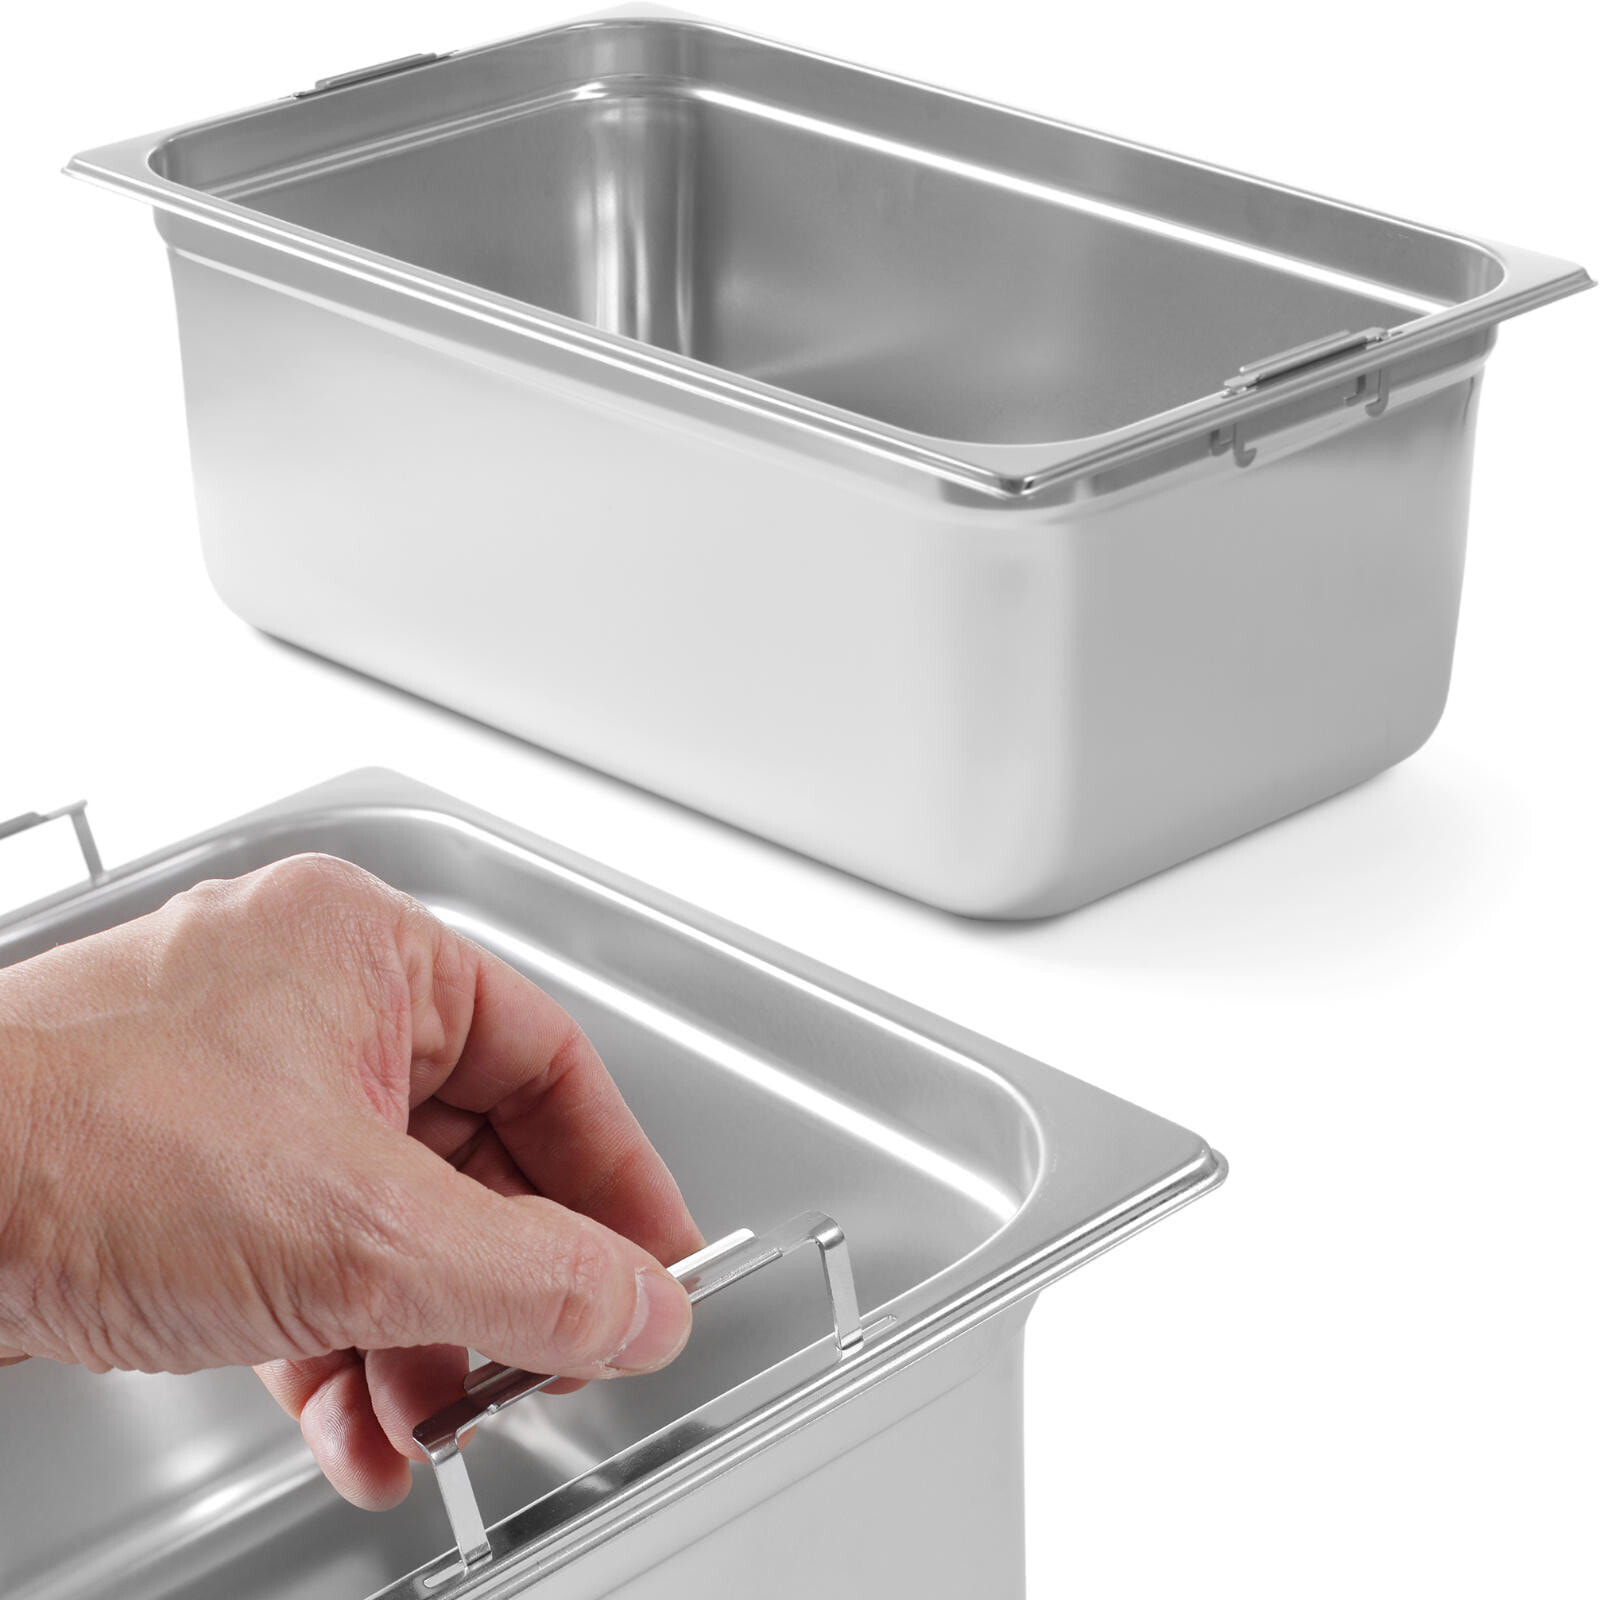 GN container with retractable handles, stainless steel GN1 / 1 530x325mm height 200mm - Hendi 803202